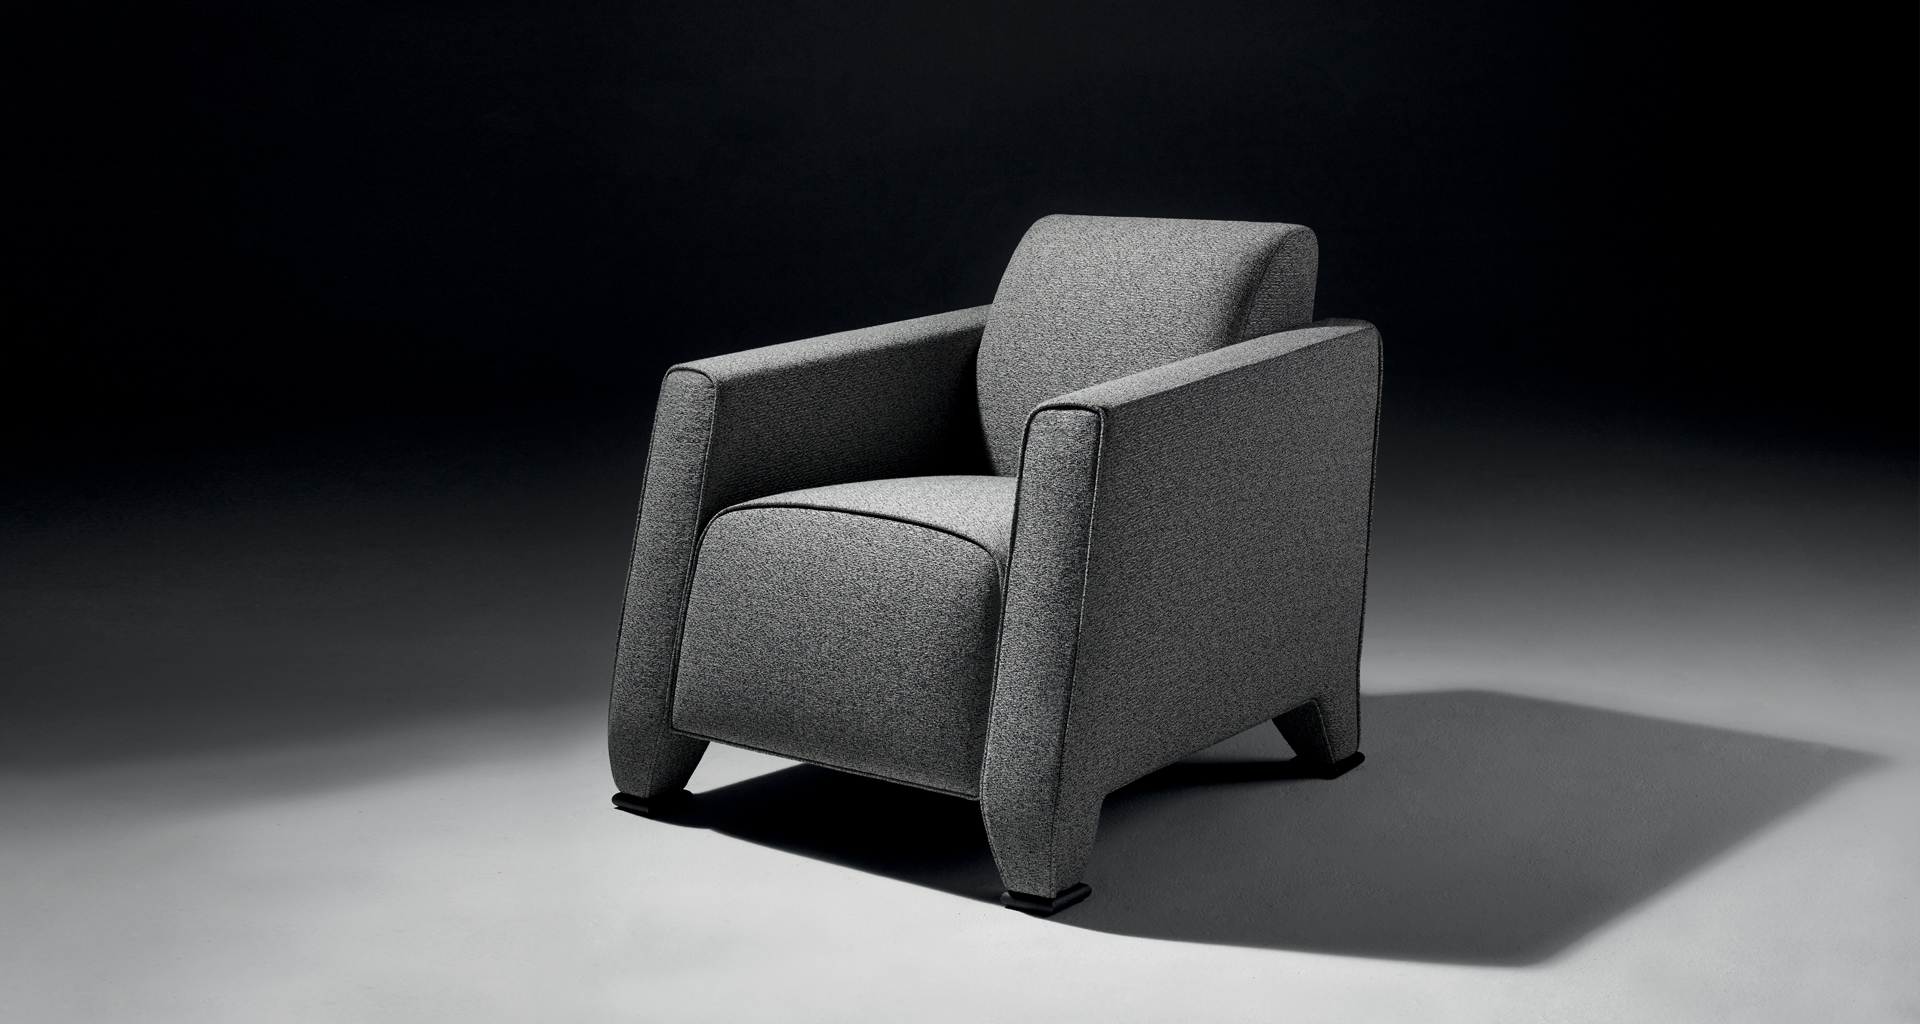 Dimensions of Martini Nini, an armchair with fabric or leather covering and seat cushions and bronze feet, from Promemoria's Indigo Tales collection | Promemoria